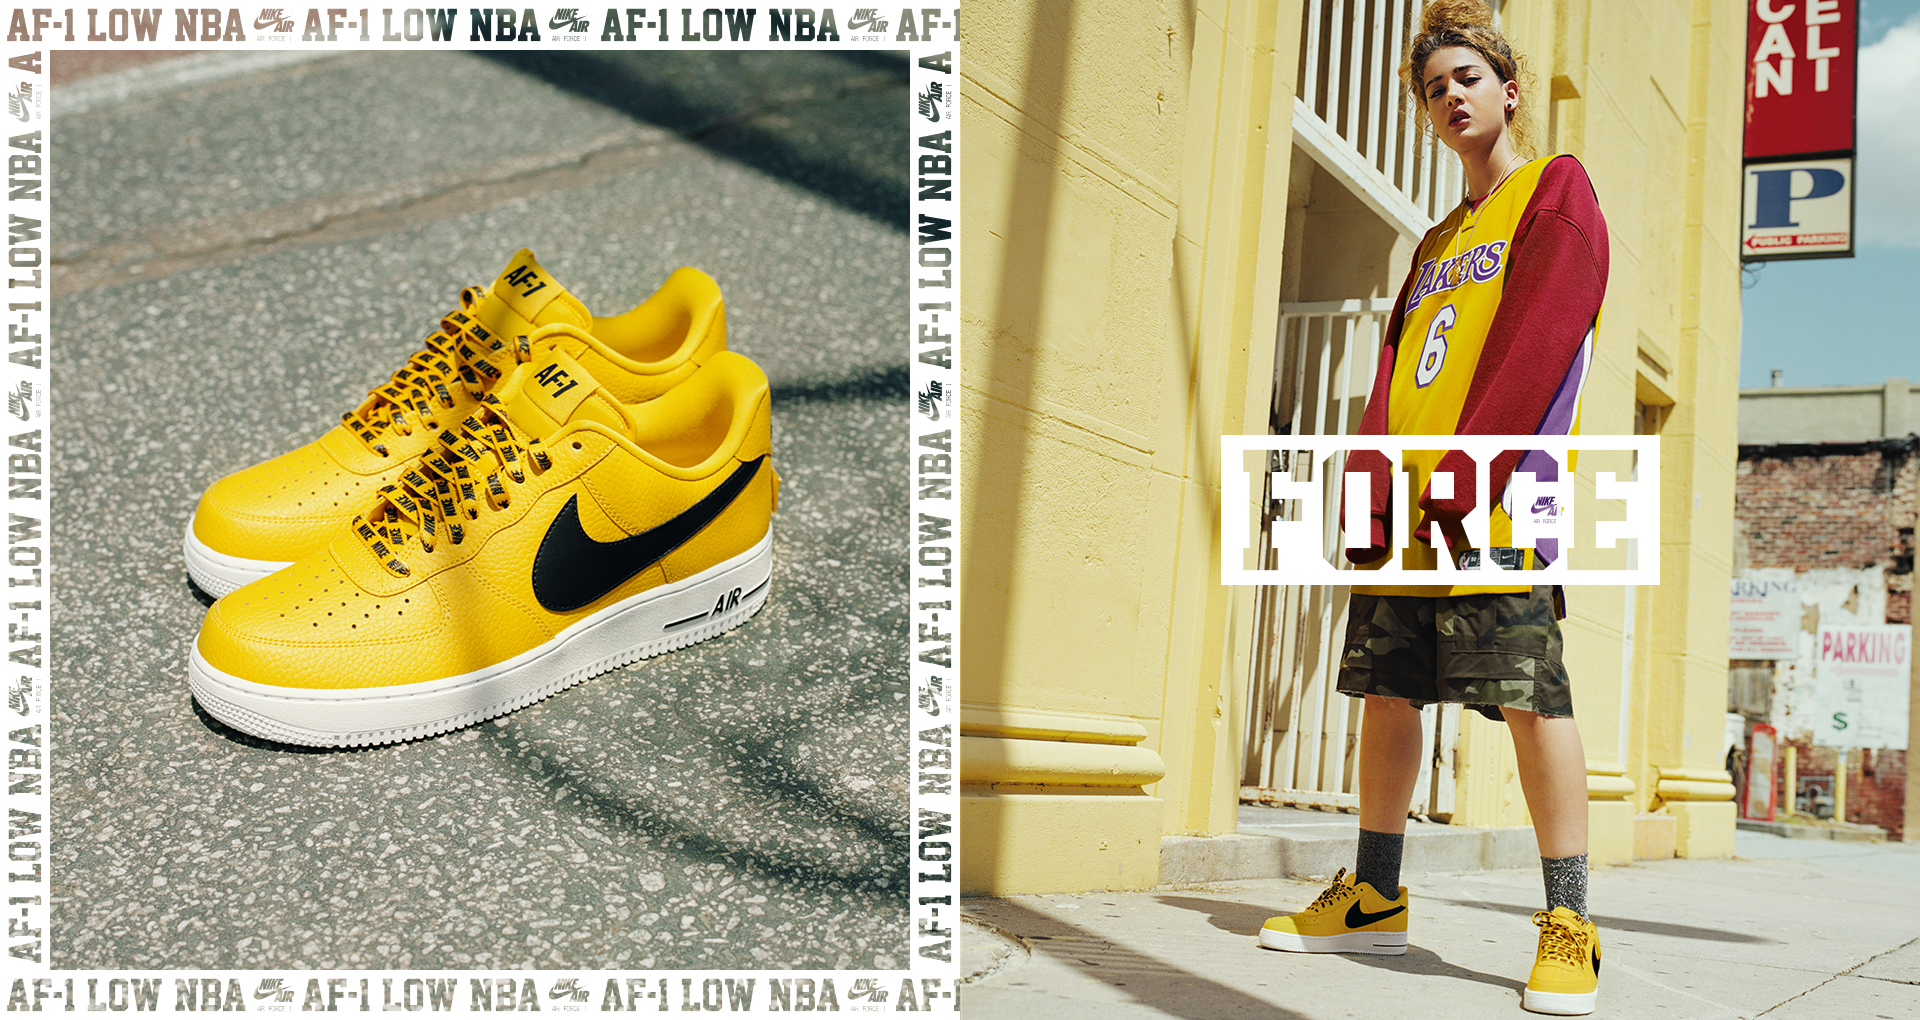 air force 1 statement game yellow